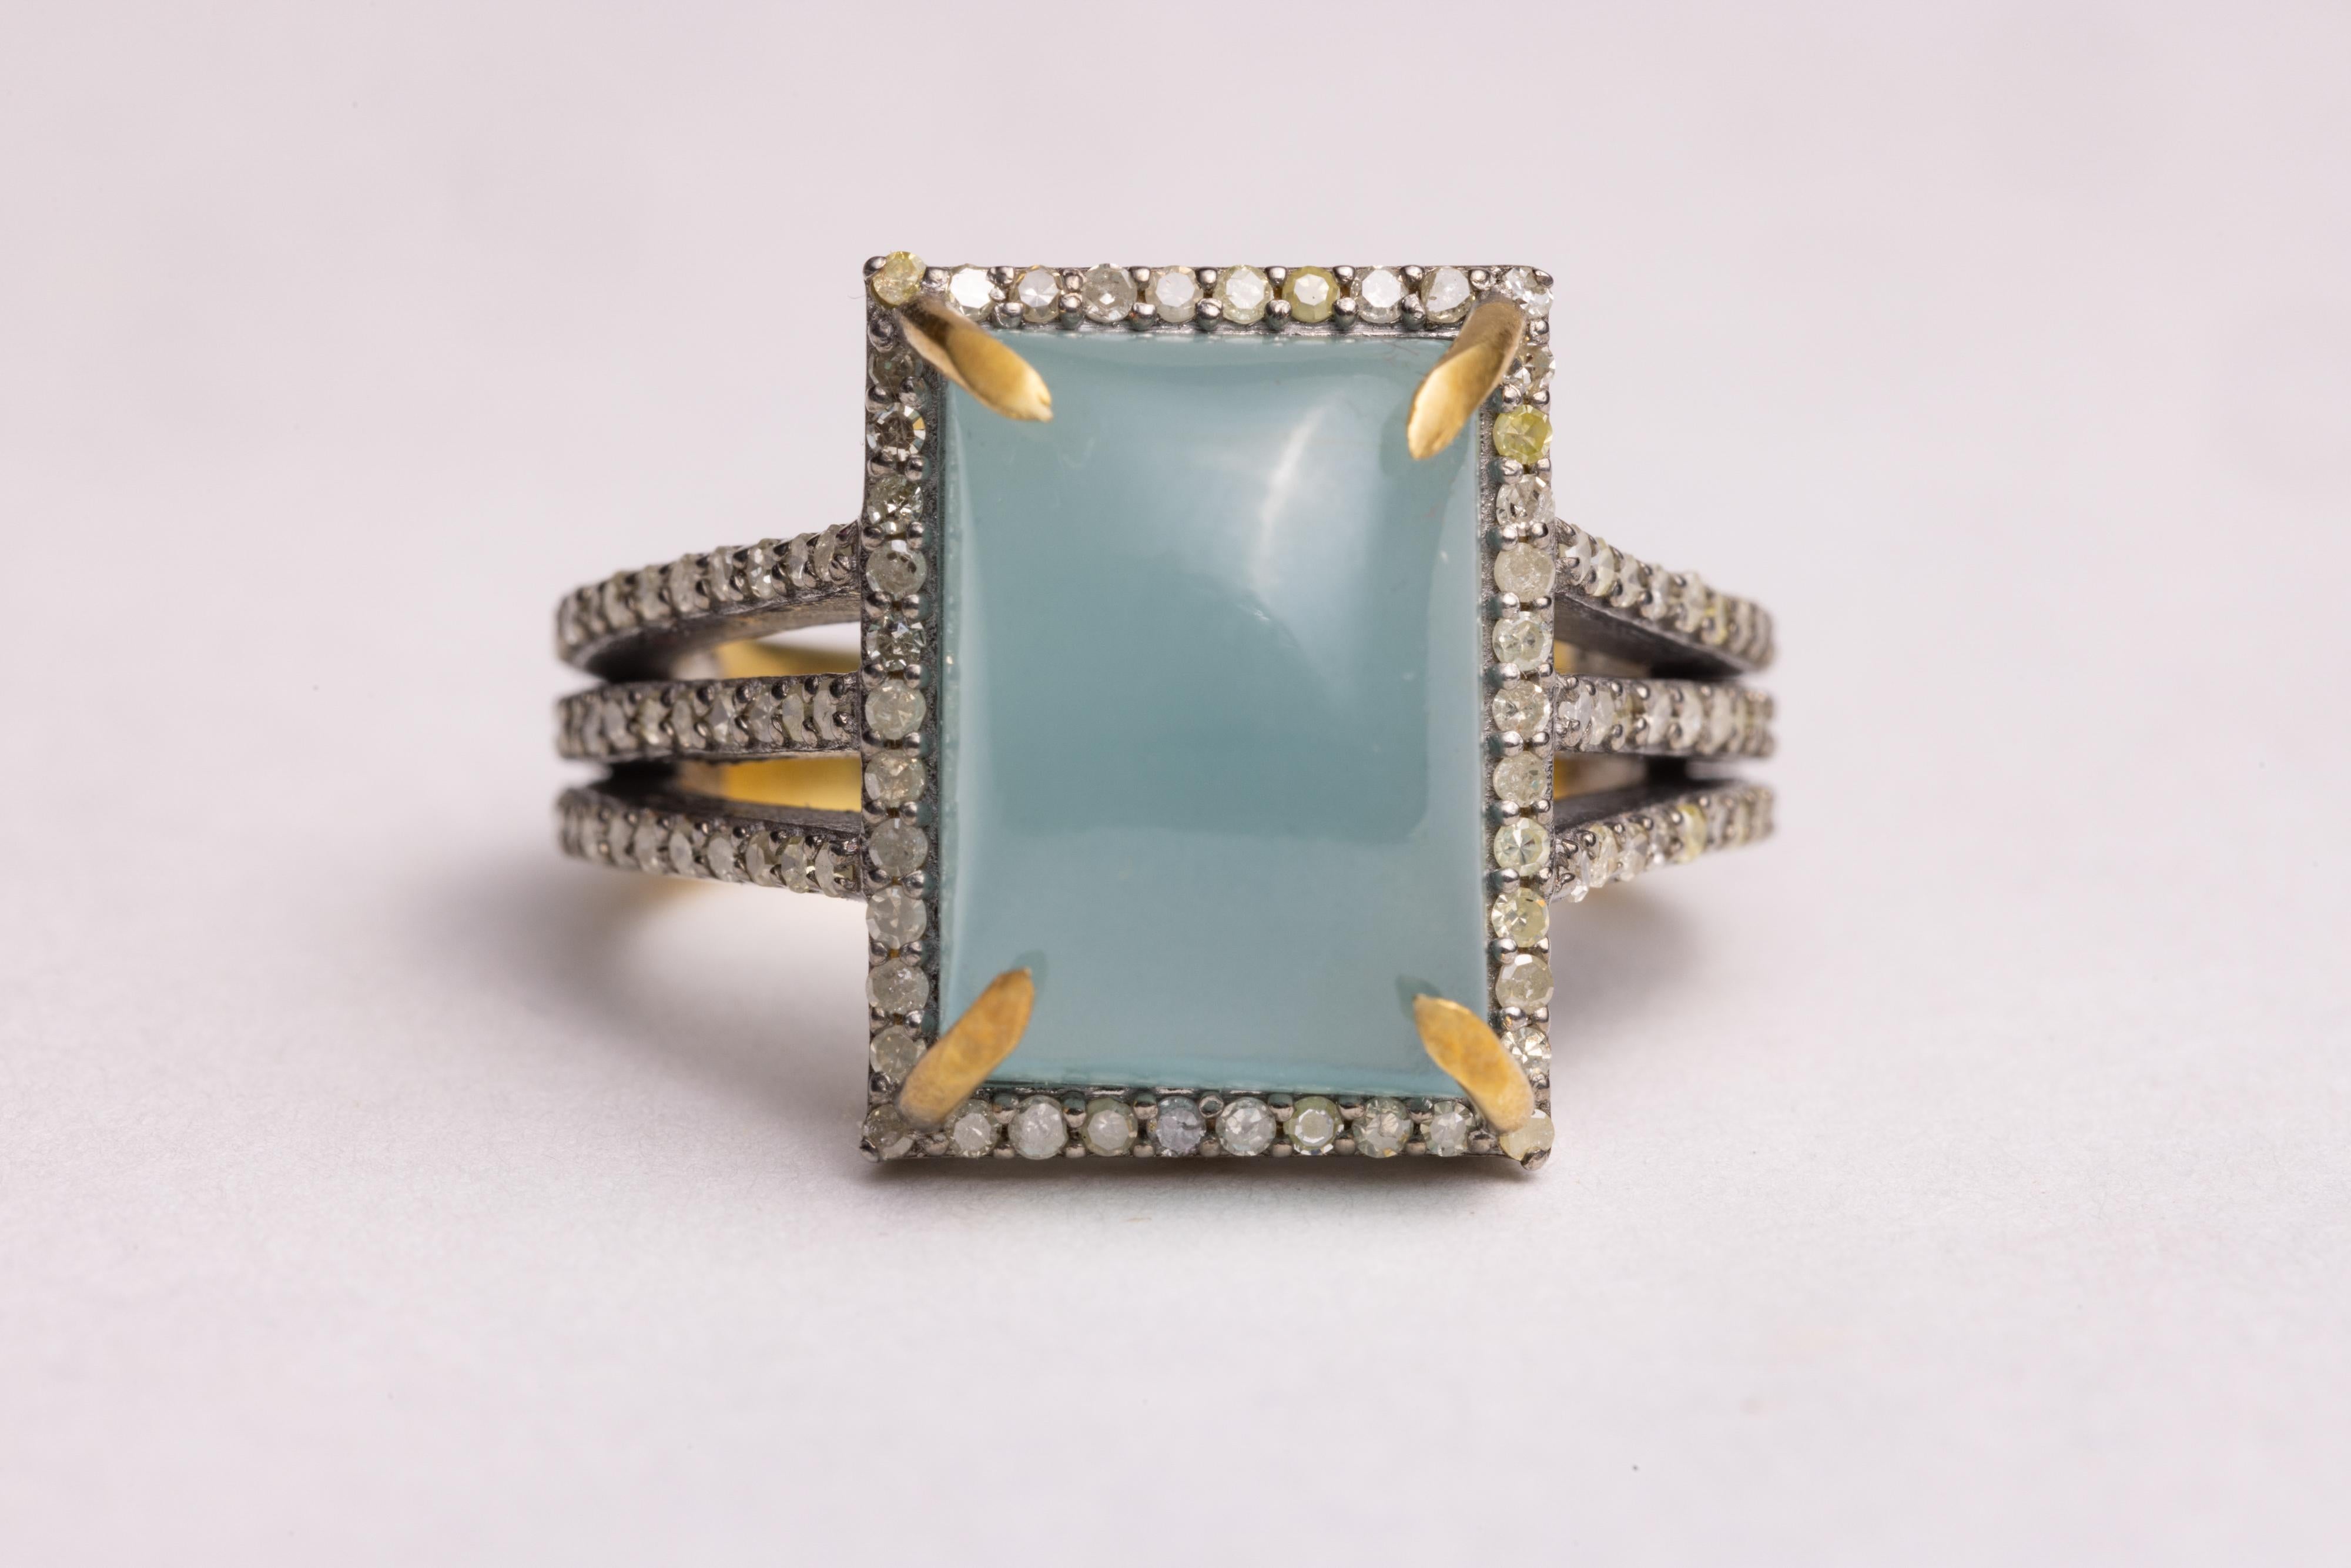 A lovely large, rectangular cabochon aquamarine with a border of round, brilliant cut diamonds in a pave` setting.  Set in sterling silver.  Carat weight of diamonds totals .68.  The aquamarine is 7.33 carats.

he fine jewelry collection is sourced,